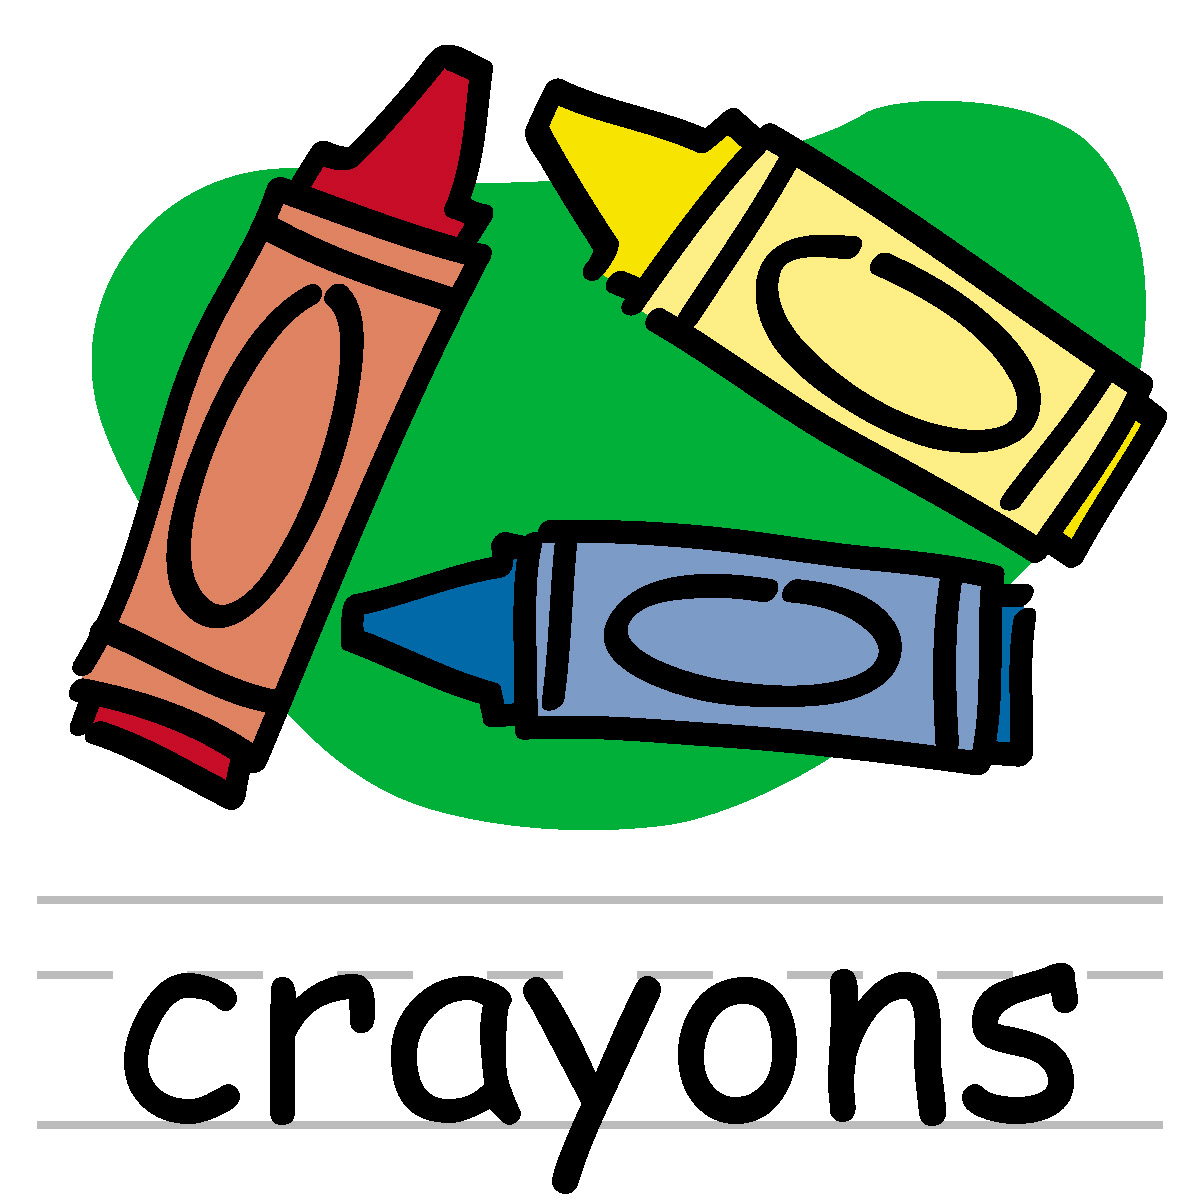 Crayon Clipart Black And White | Clipart Panda - Free Clipart Images